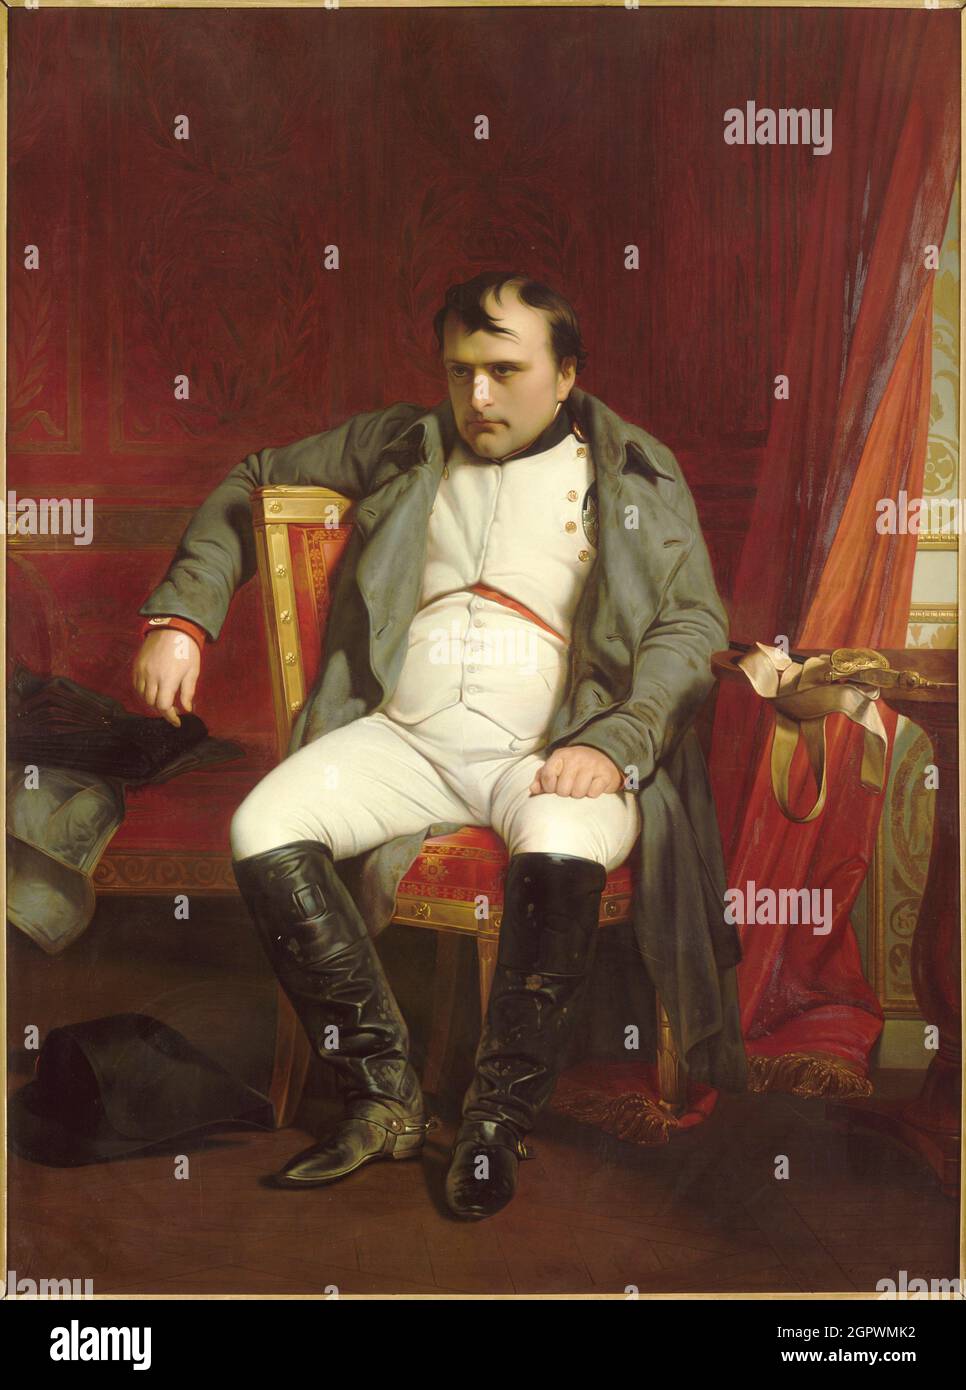 Napoleon at Fontainebleau, March 31, 1814, 1840. Found in the Collection of the Mus&#xe9;e de l'Arm&#xe9;e, Paris. Stock Photo